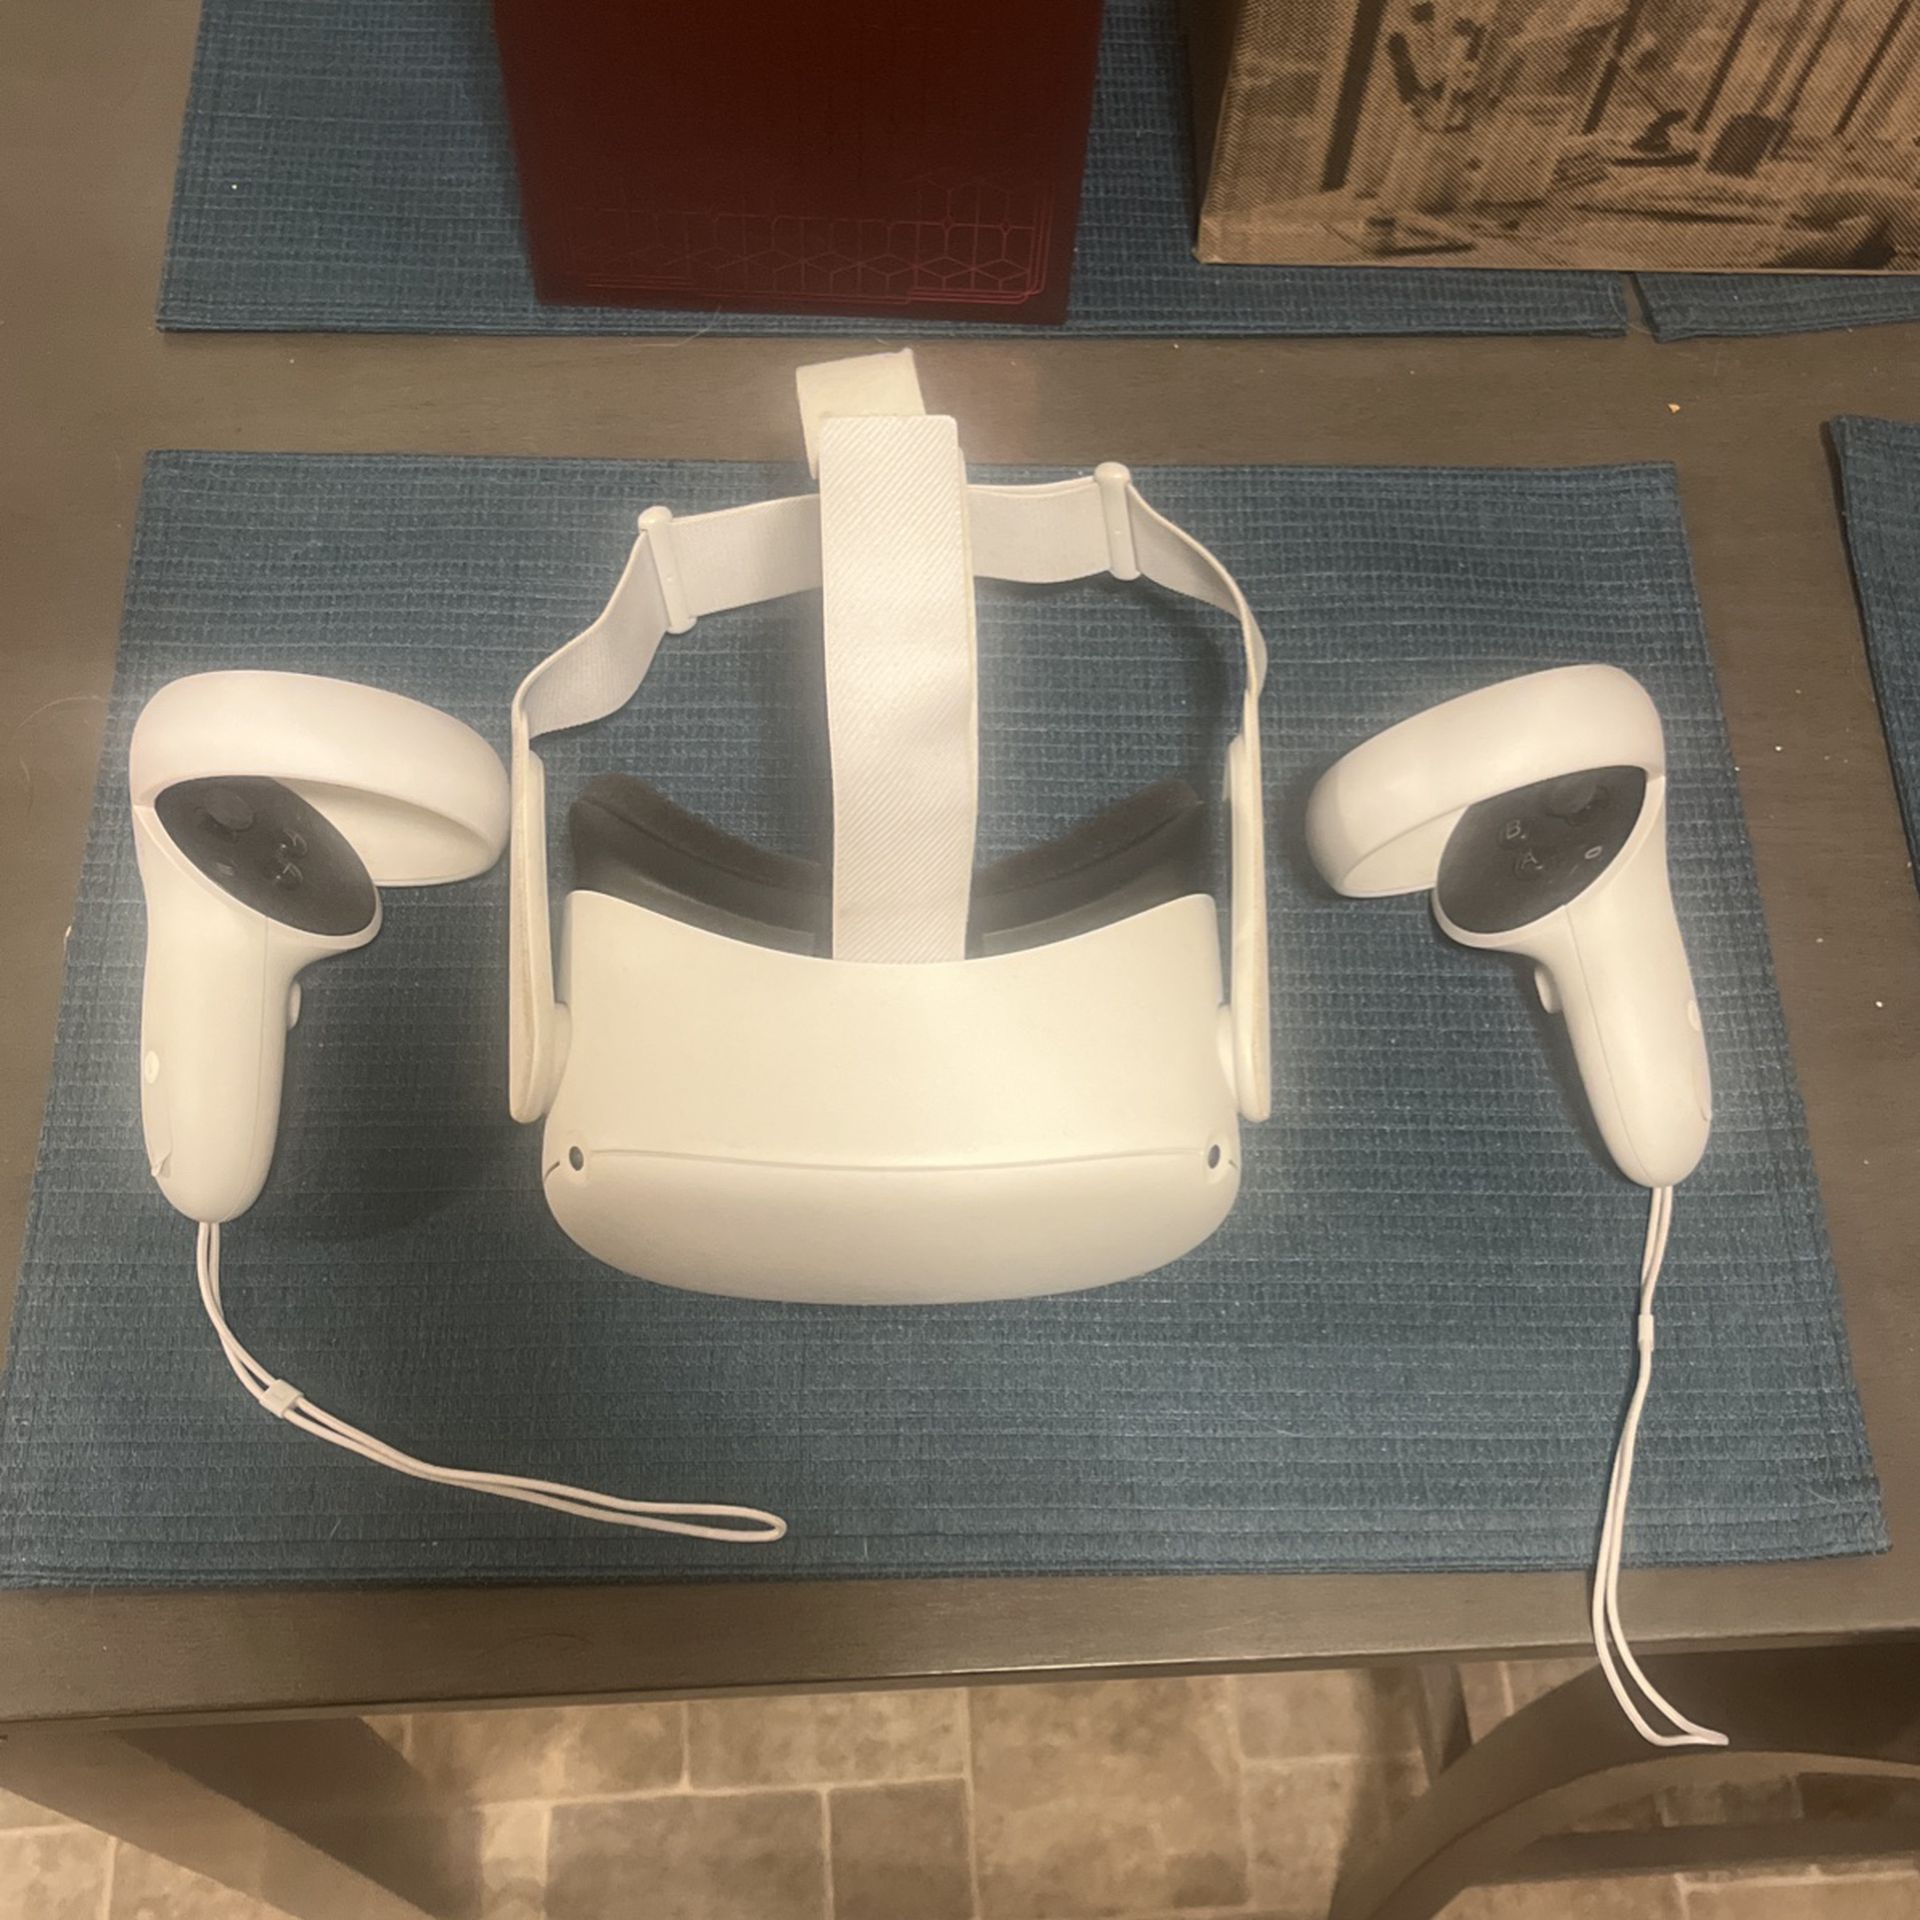 Quest 2 VR System